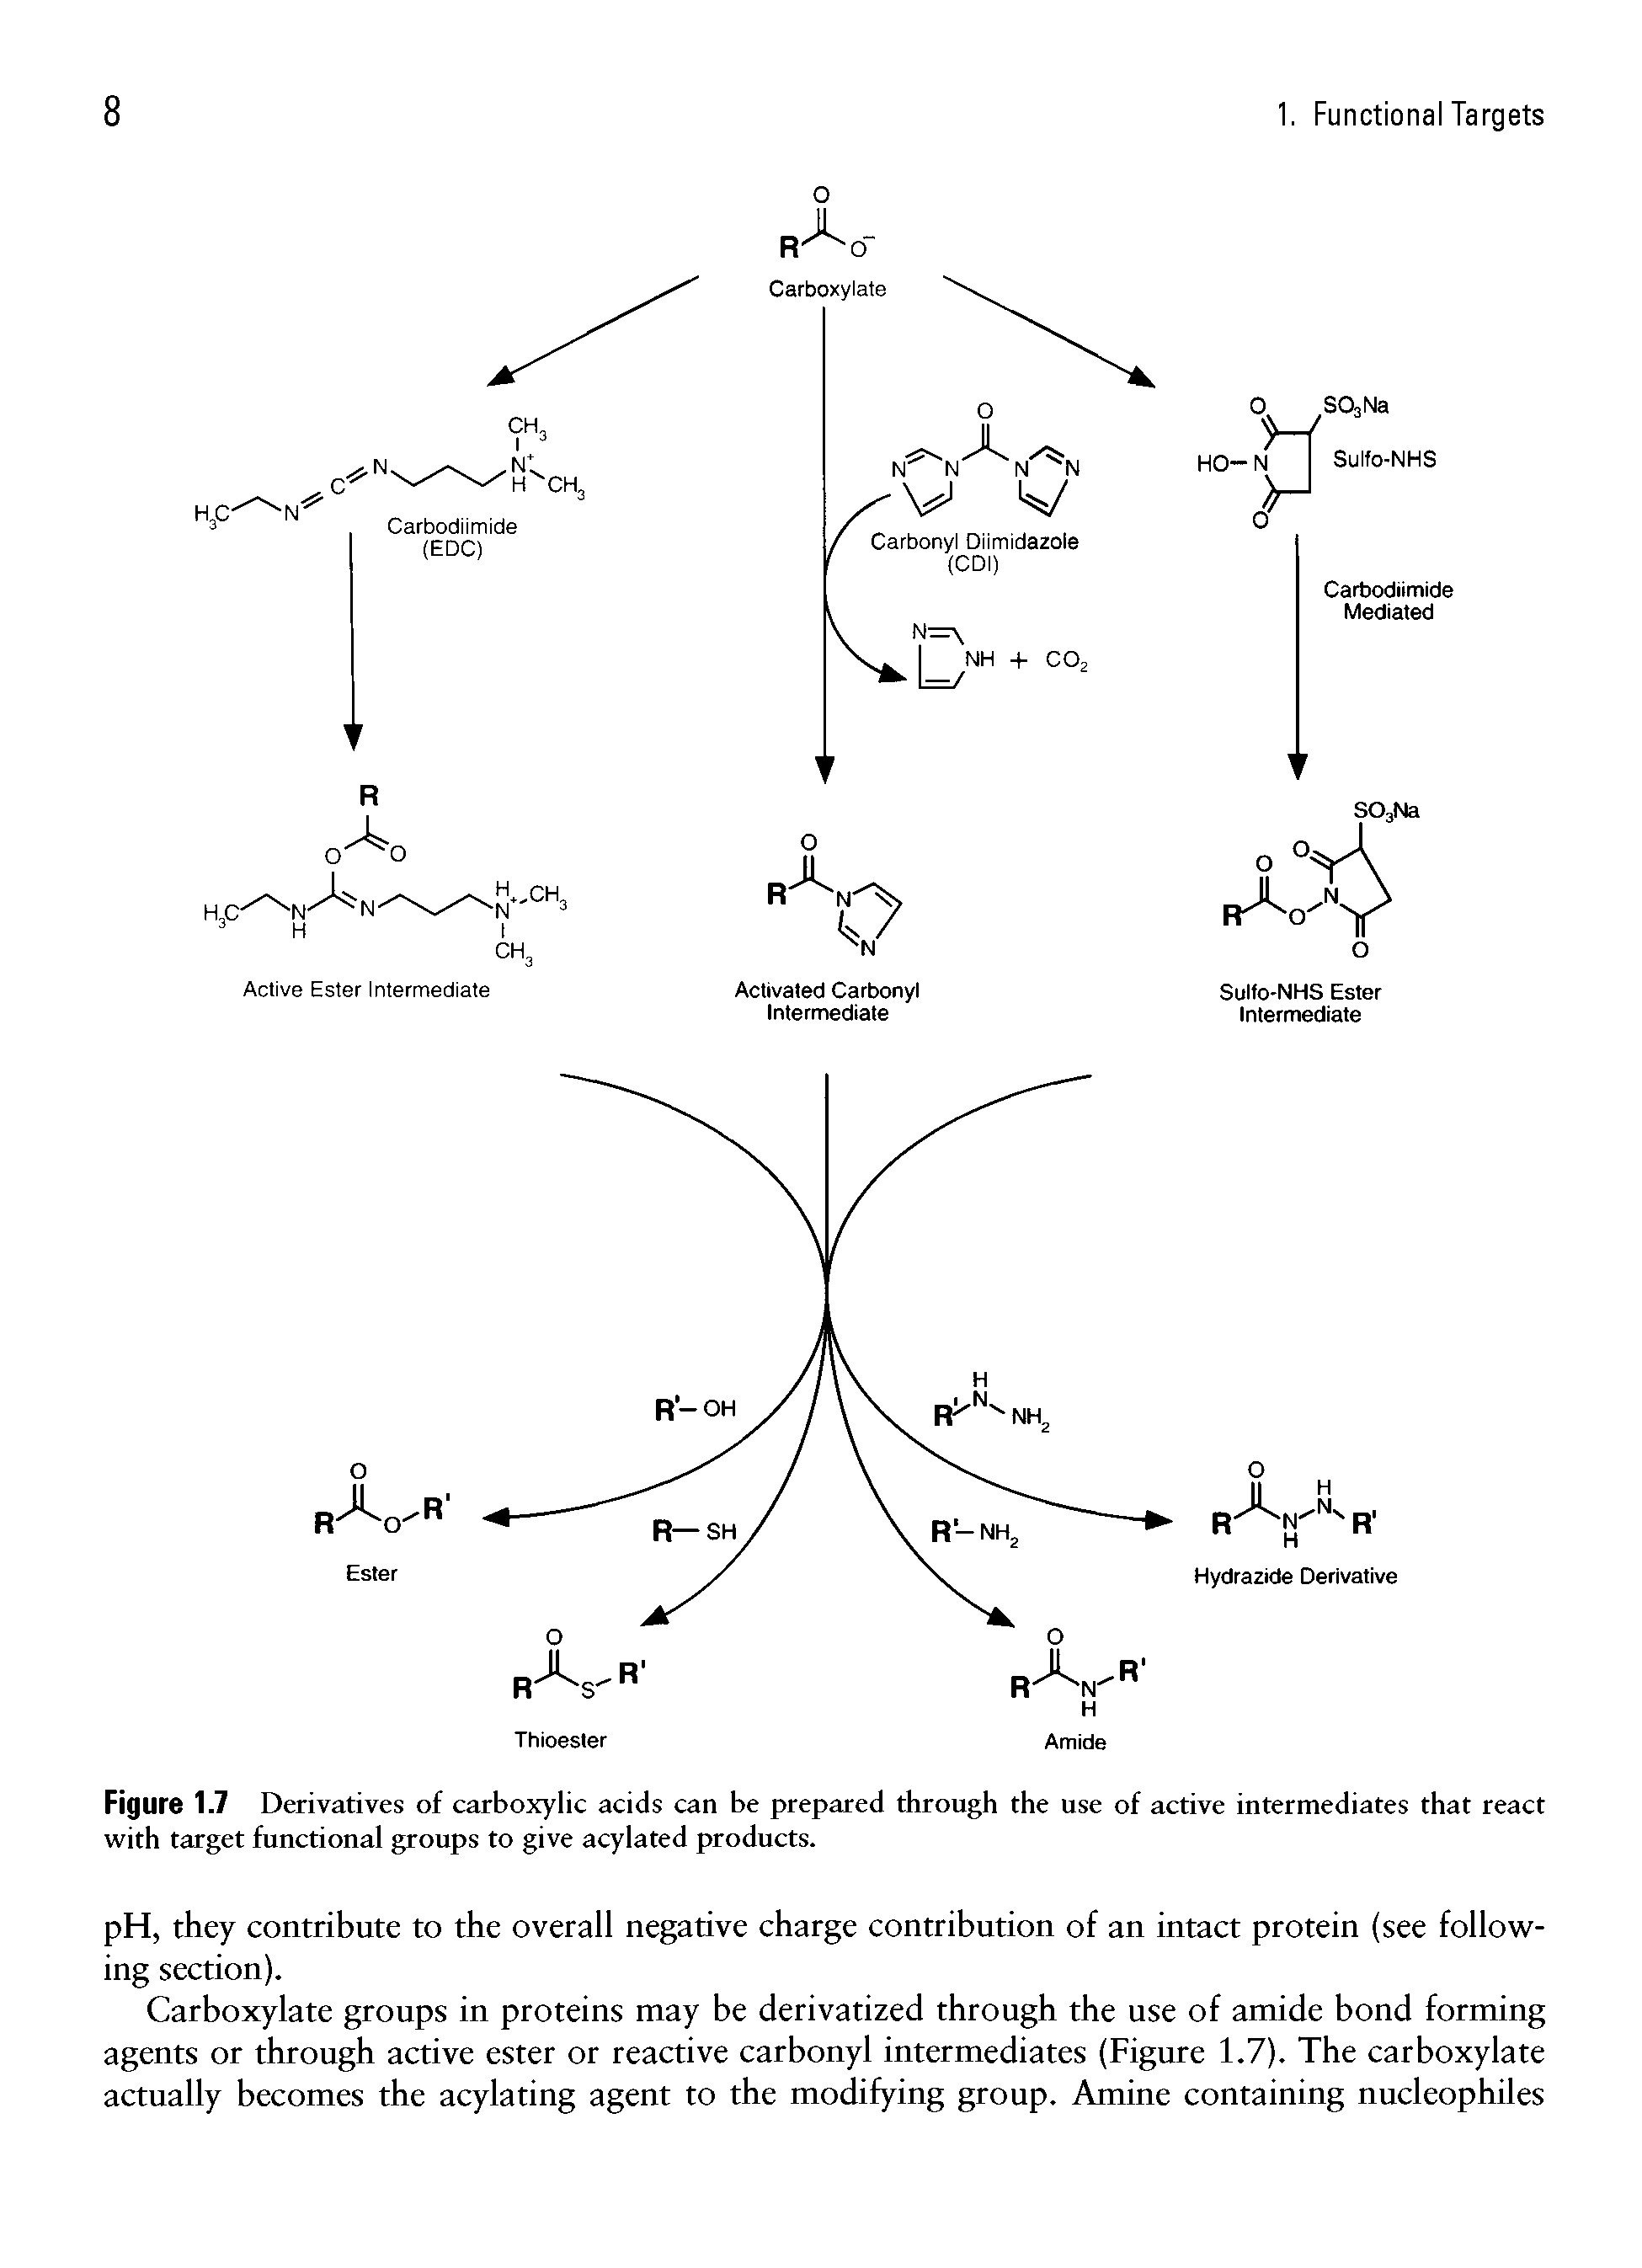 Figure 1.7 Derivatives of carboxylic acids can be prepared through the use of active intermediates that react with target functional groups to give acylated products.